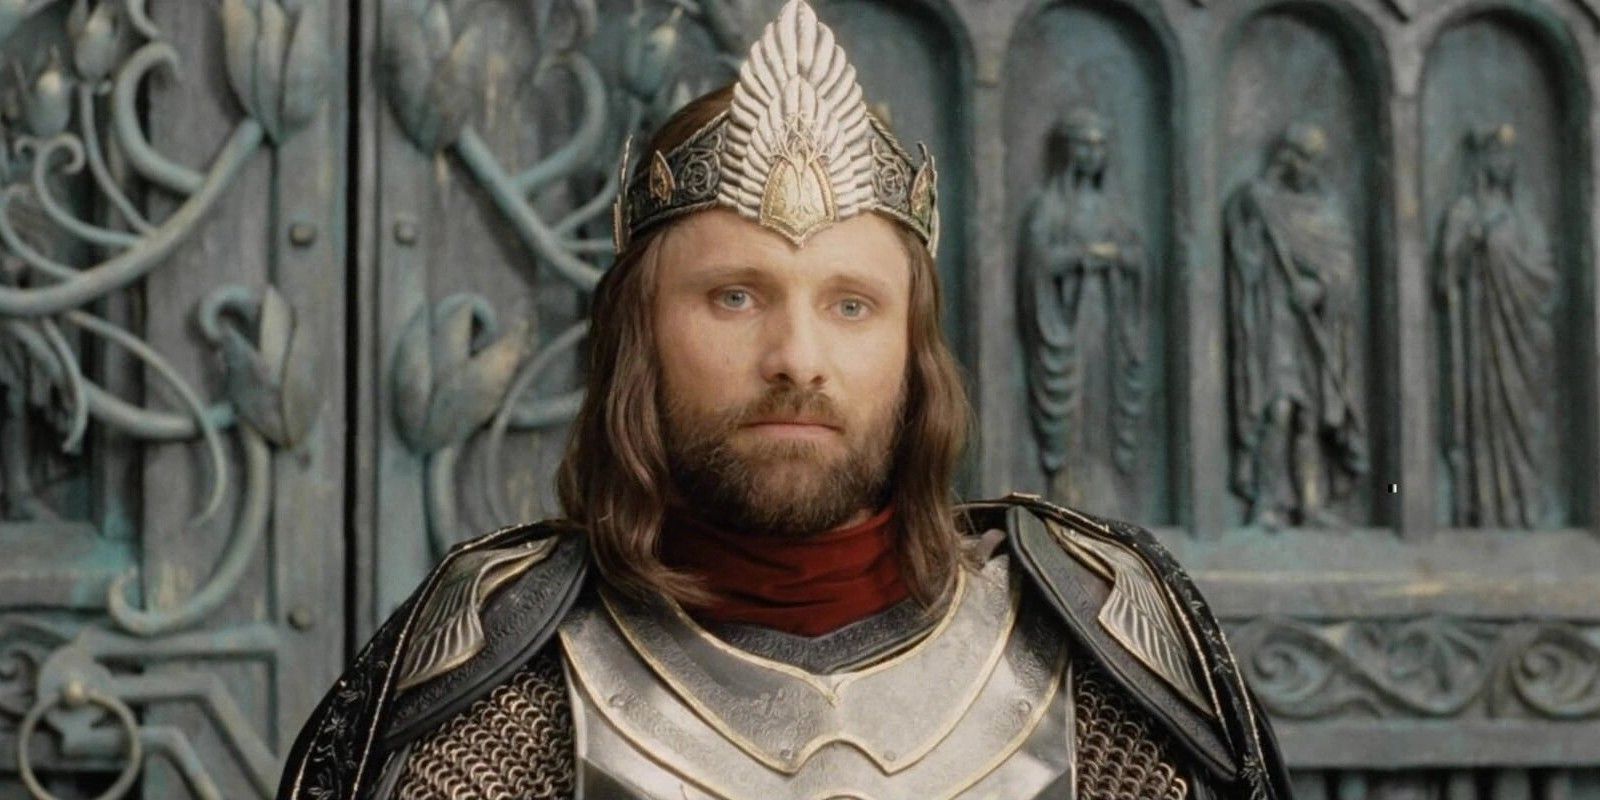 Aragorn crowned as king of Gondor in The Lord of the Rings